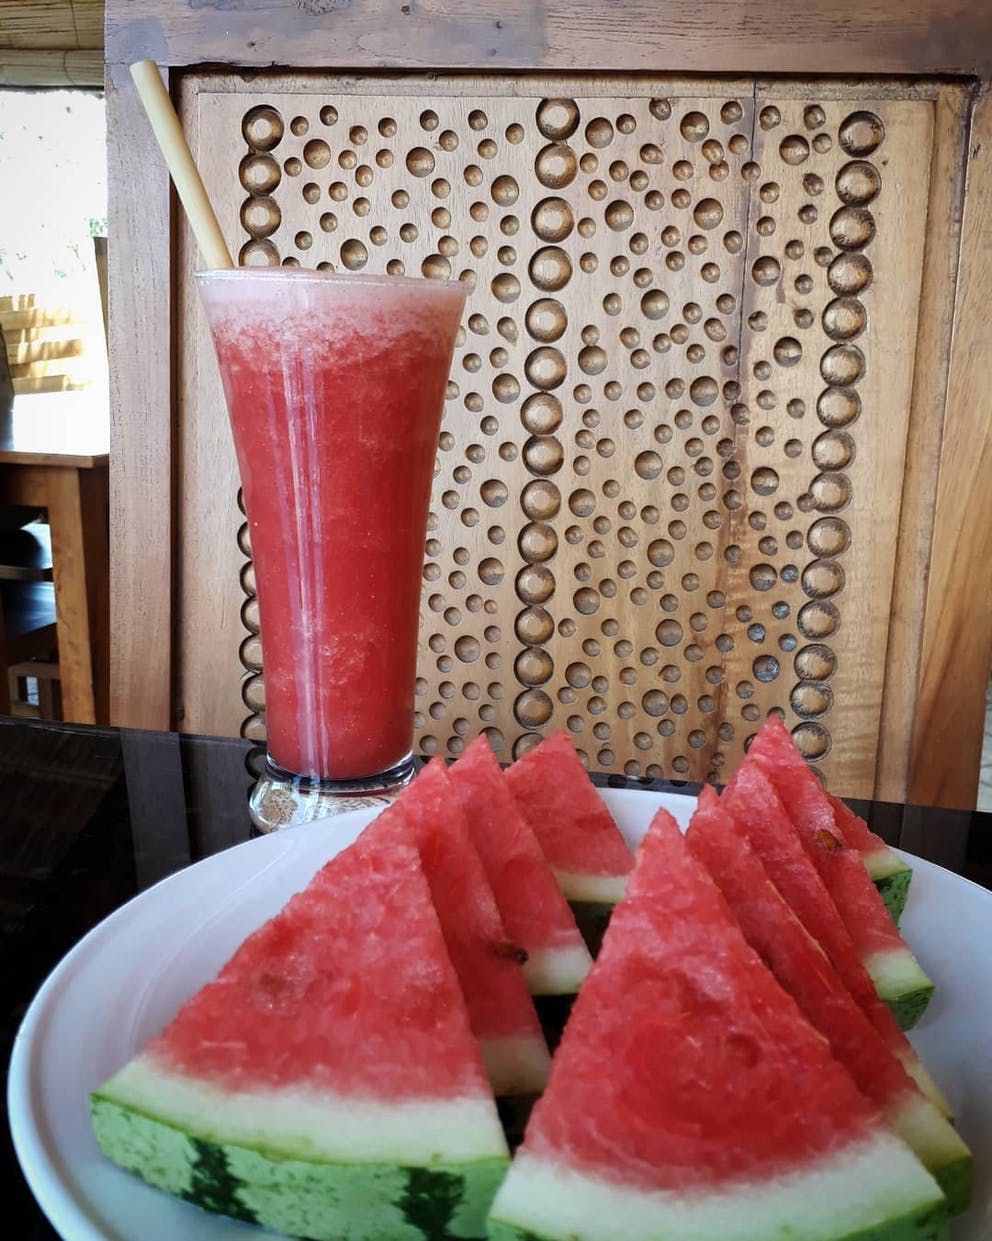 Watermelon fruit and juice